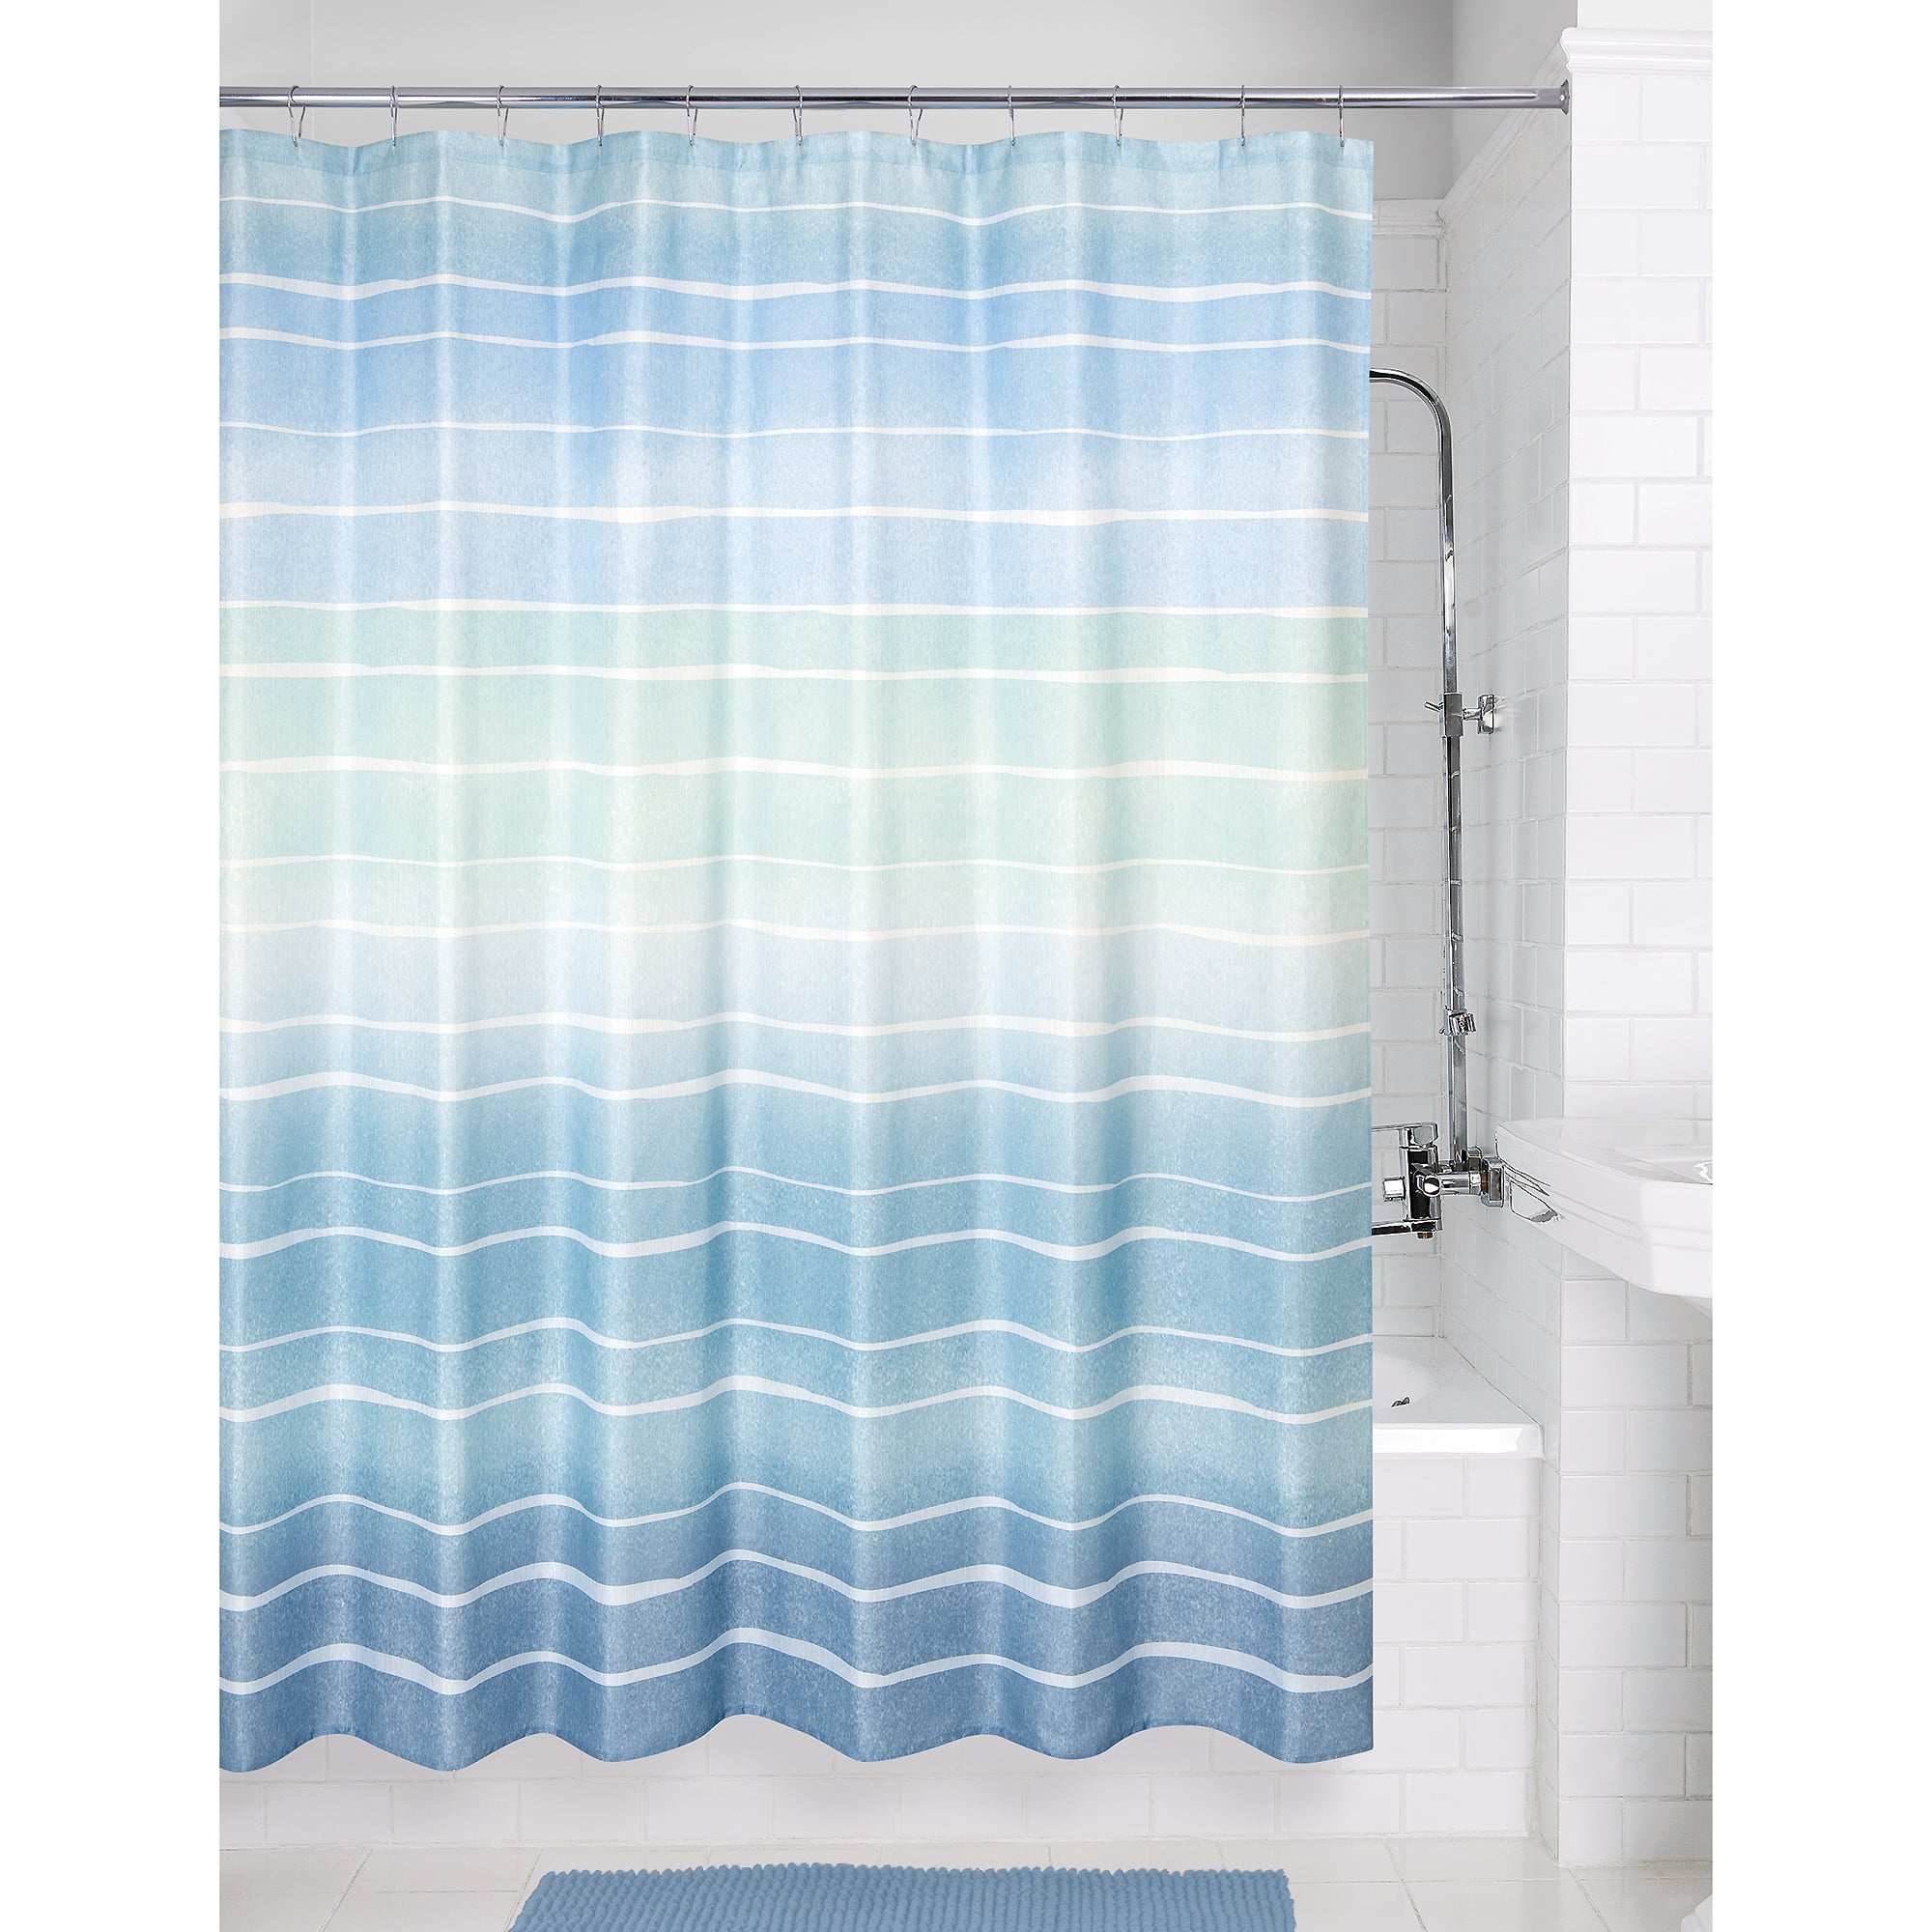 Metallic Ombre Stripe Blue Polyester Printed Fabric Shower Curtain by